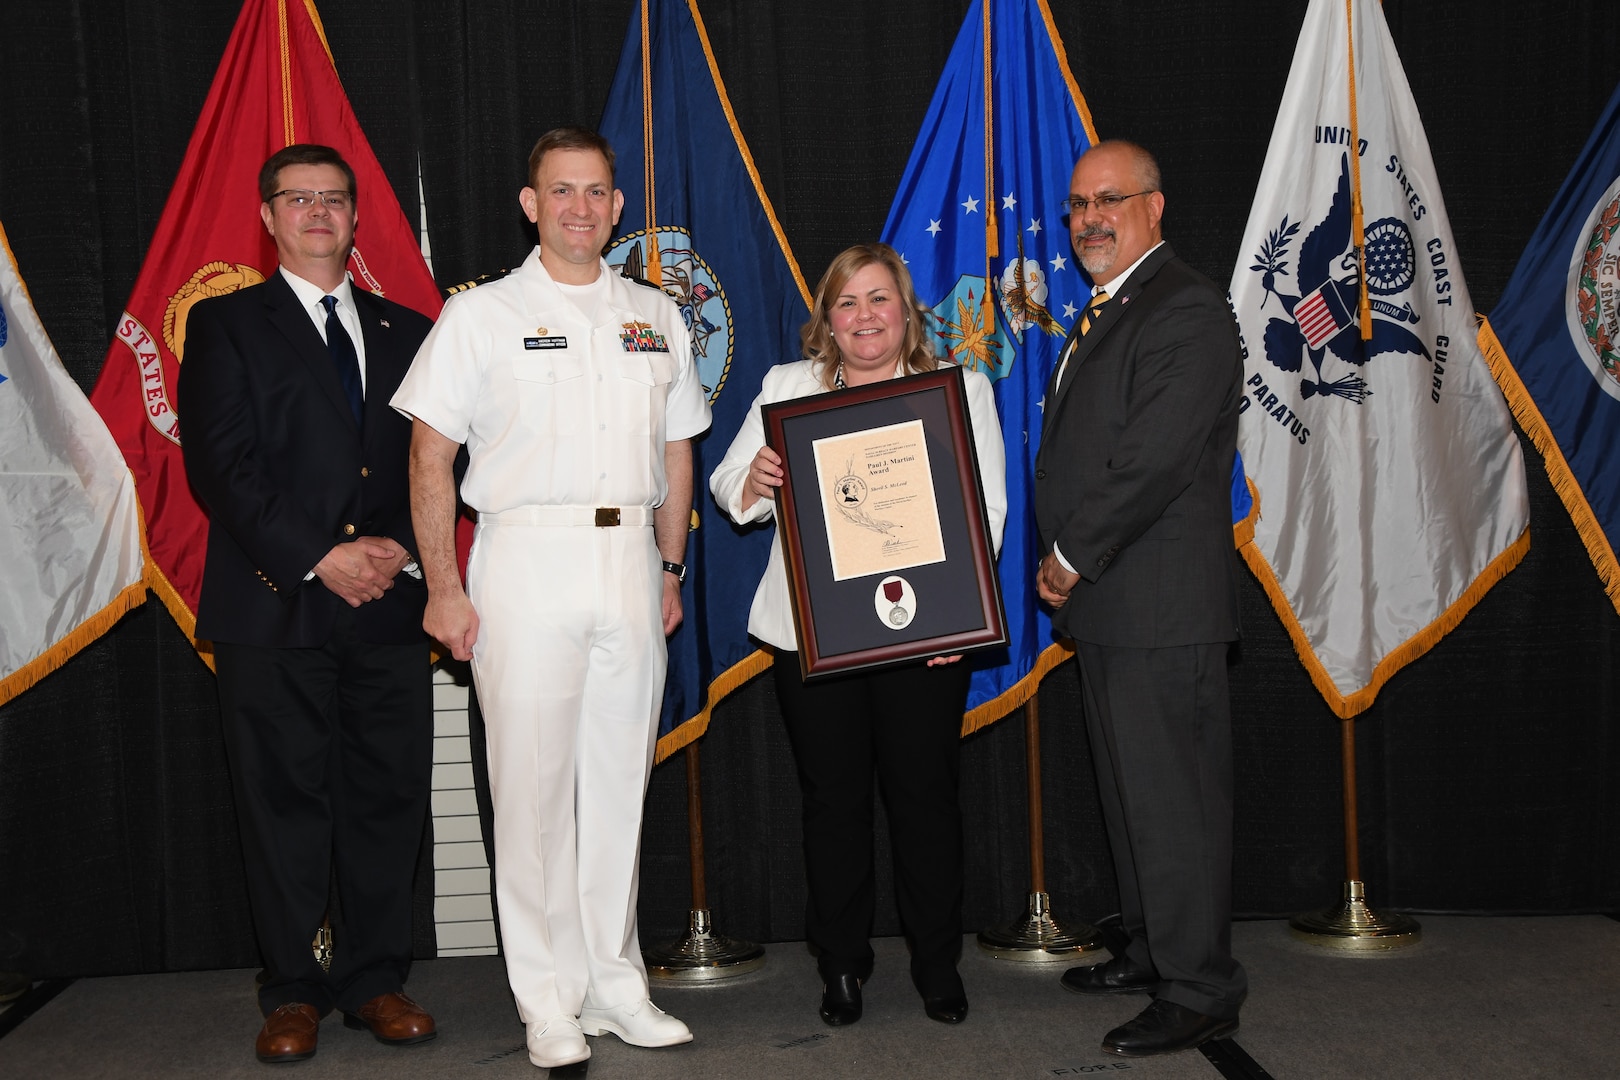 IMAGE: Sheril McLeod is presented the Paul J. Martini Award at Naval Surface Warfare Center Dahlgren Division's annual awards ceremony, Apr. 26 at the Fredericksburg Expo and Conference Center.

The award is named in honor of Paul J. Martini, who was head of the Engineering Support Directorate of the Naval Ordnance Laboratory from November 1951 to December 1973.